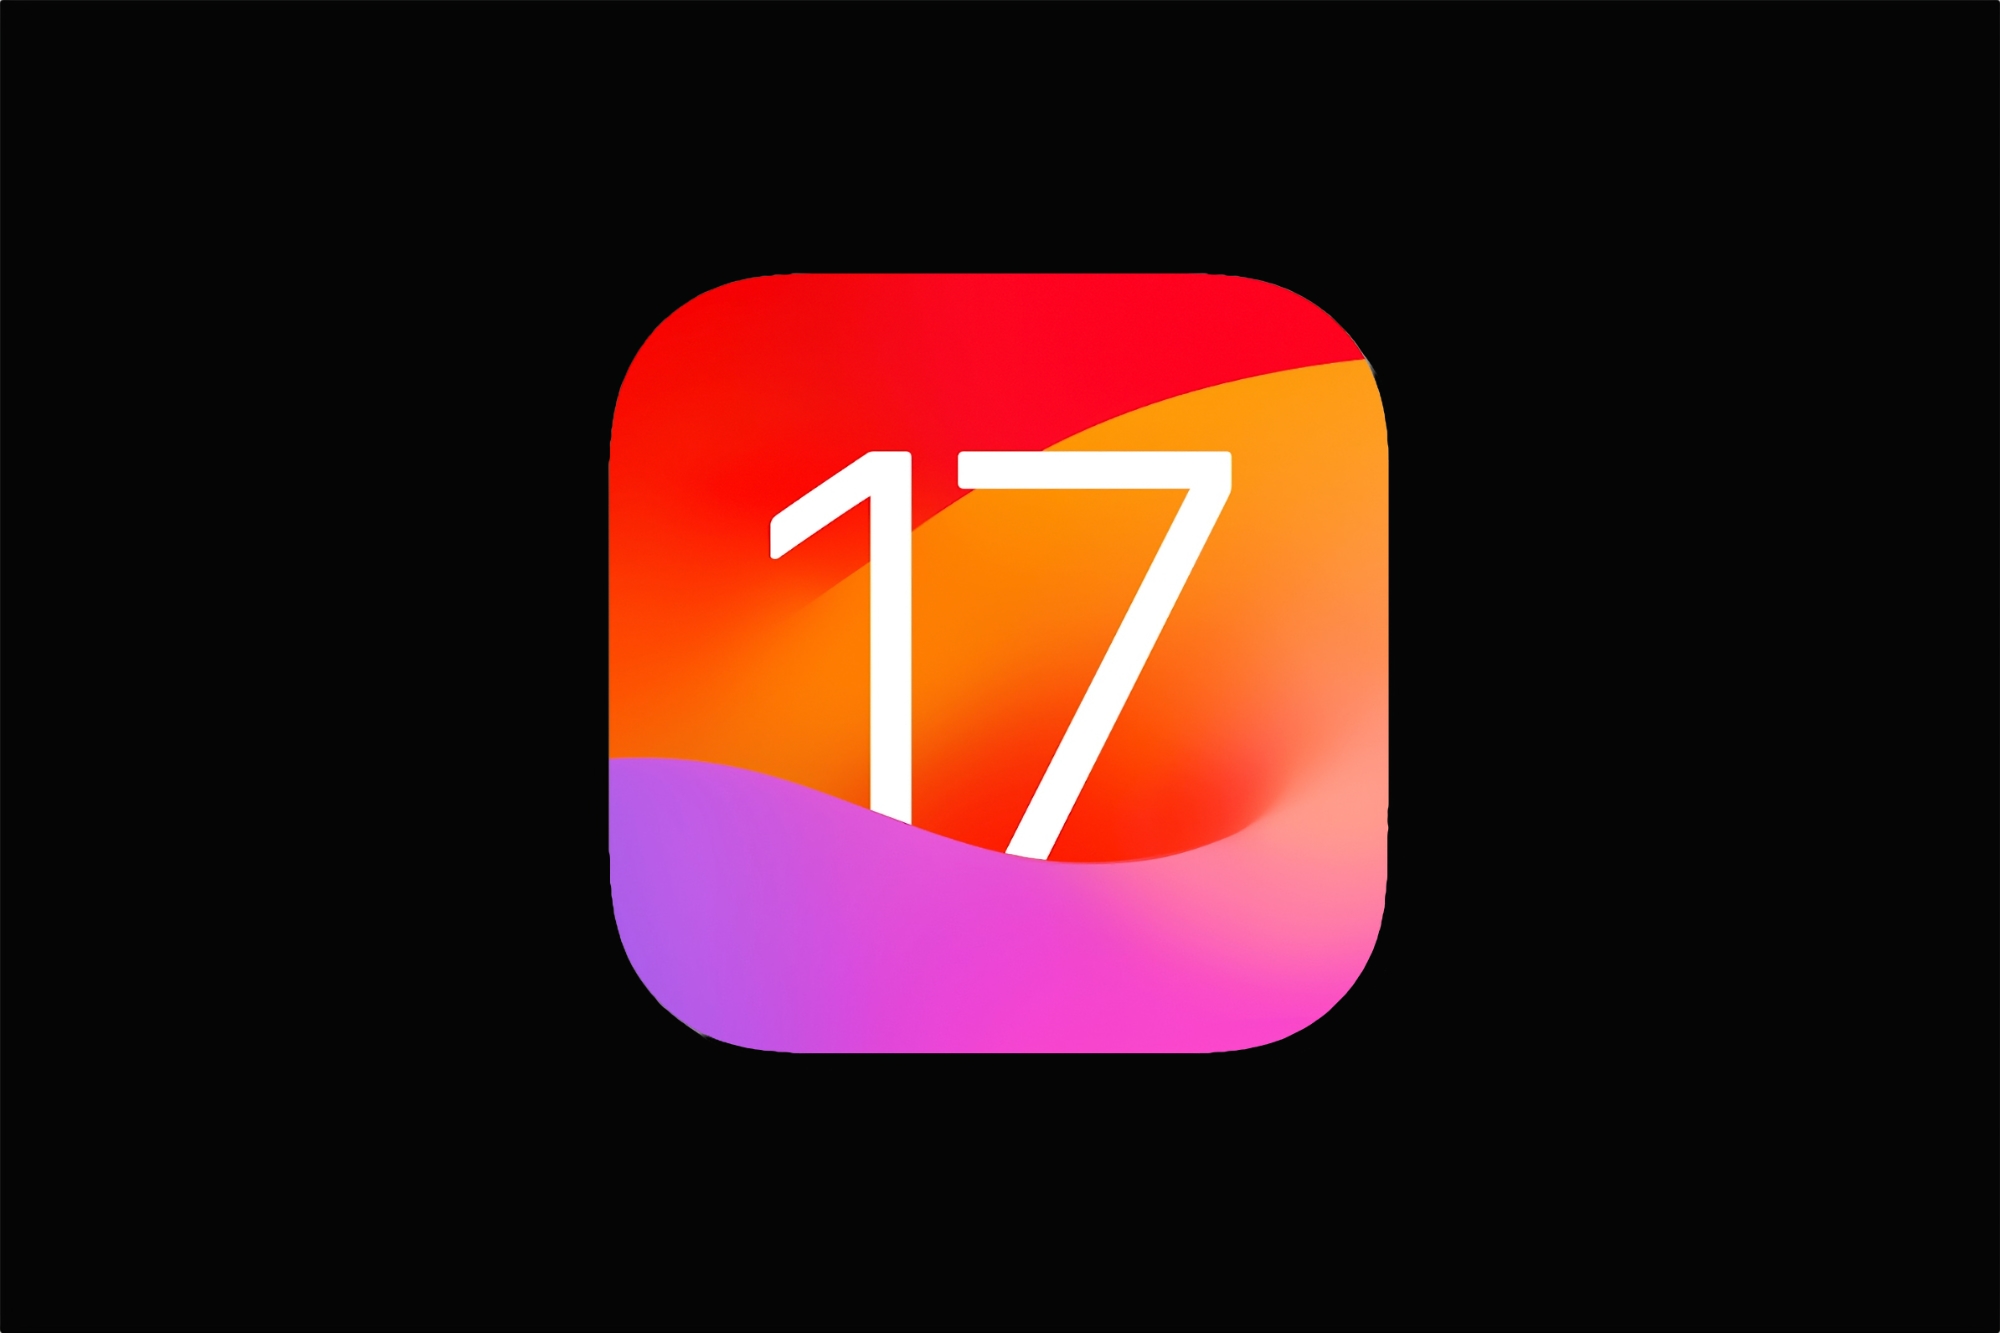 Apple releases first beta versions of iOS 17 and iPadOS 17